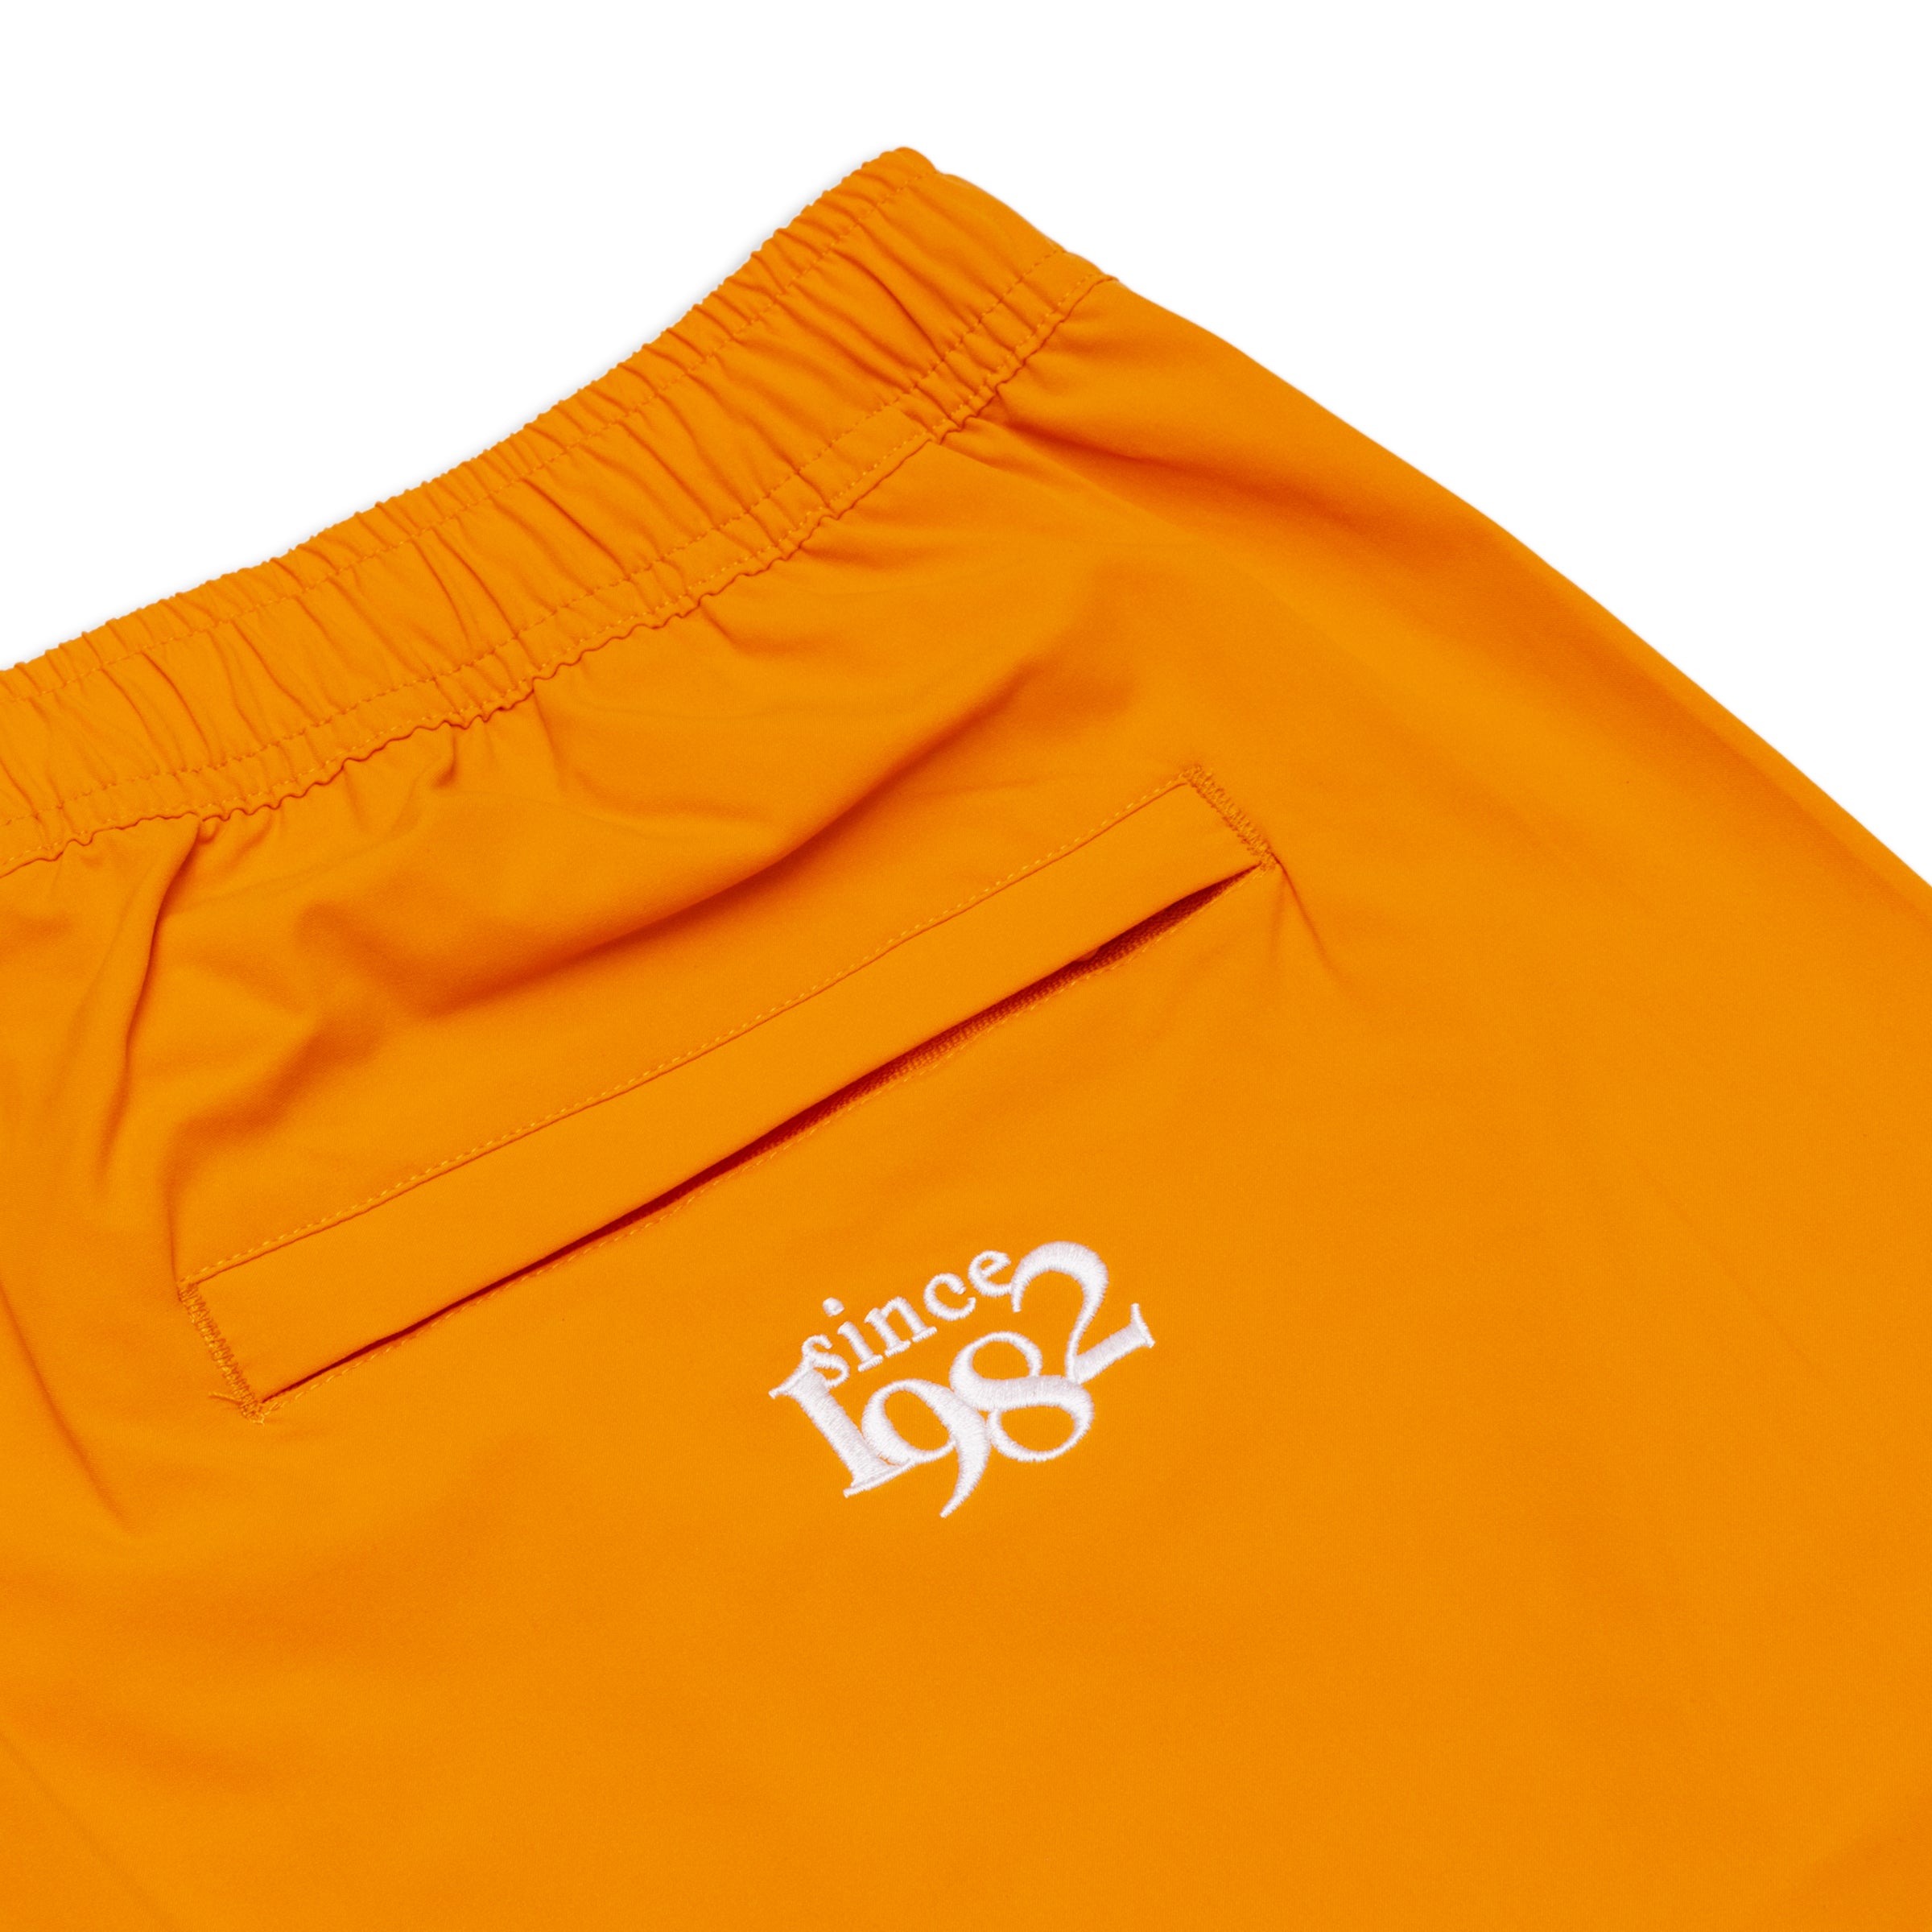 Carrot Since Flag Side Print Every Day Shorts